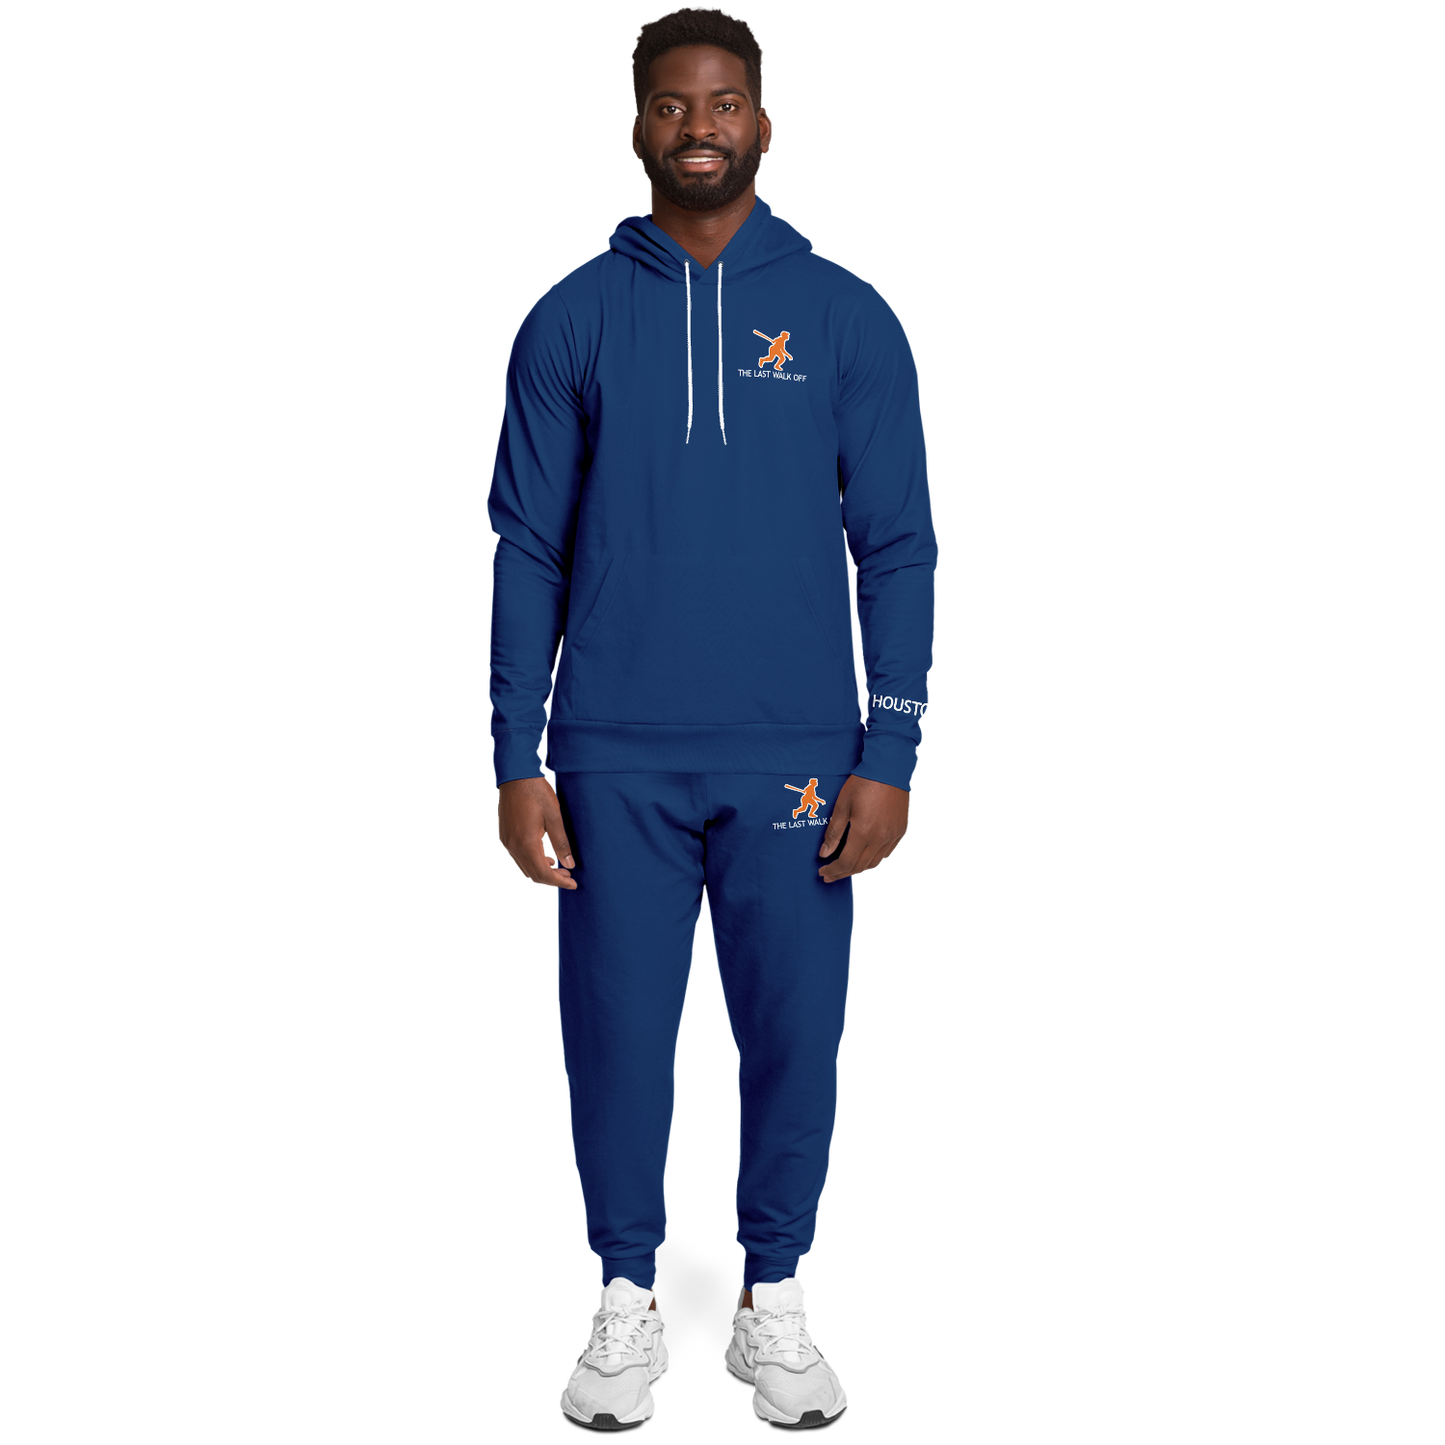 Houston Blue Hoodie and Joggers POST